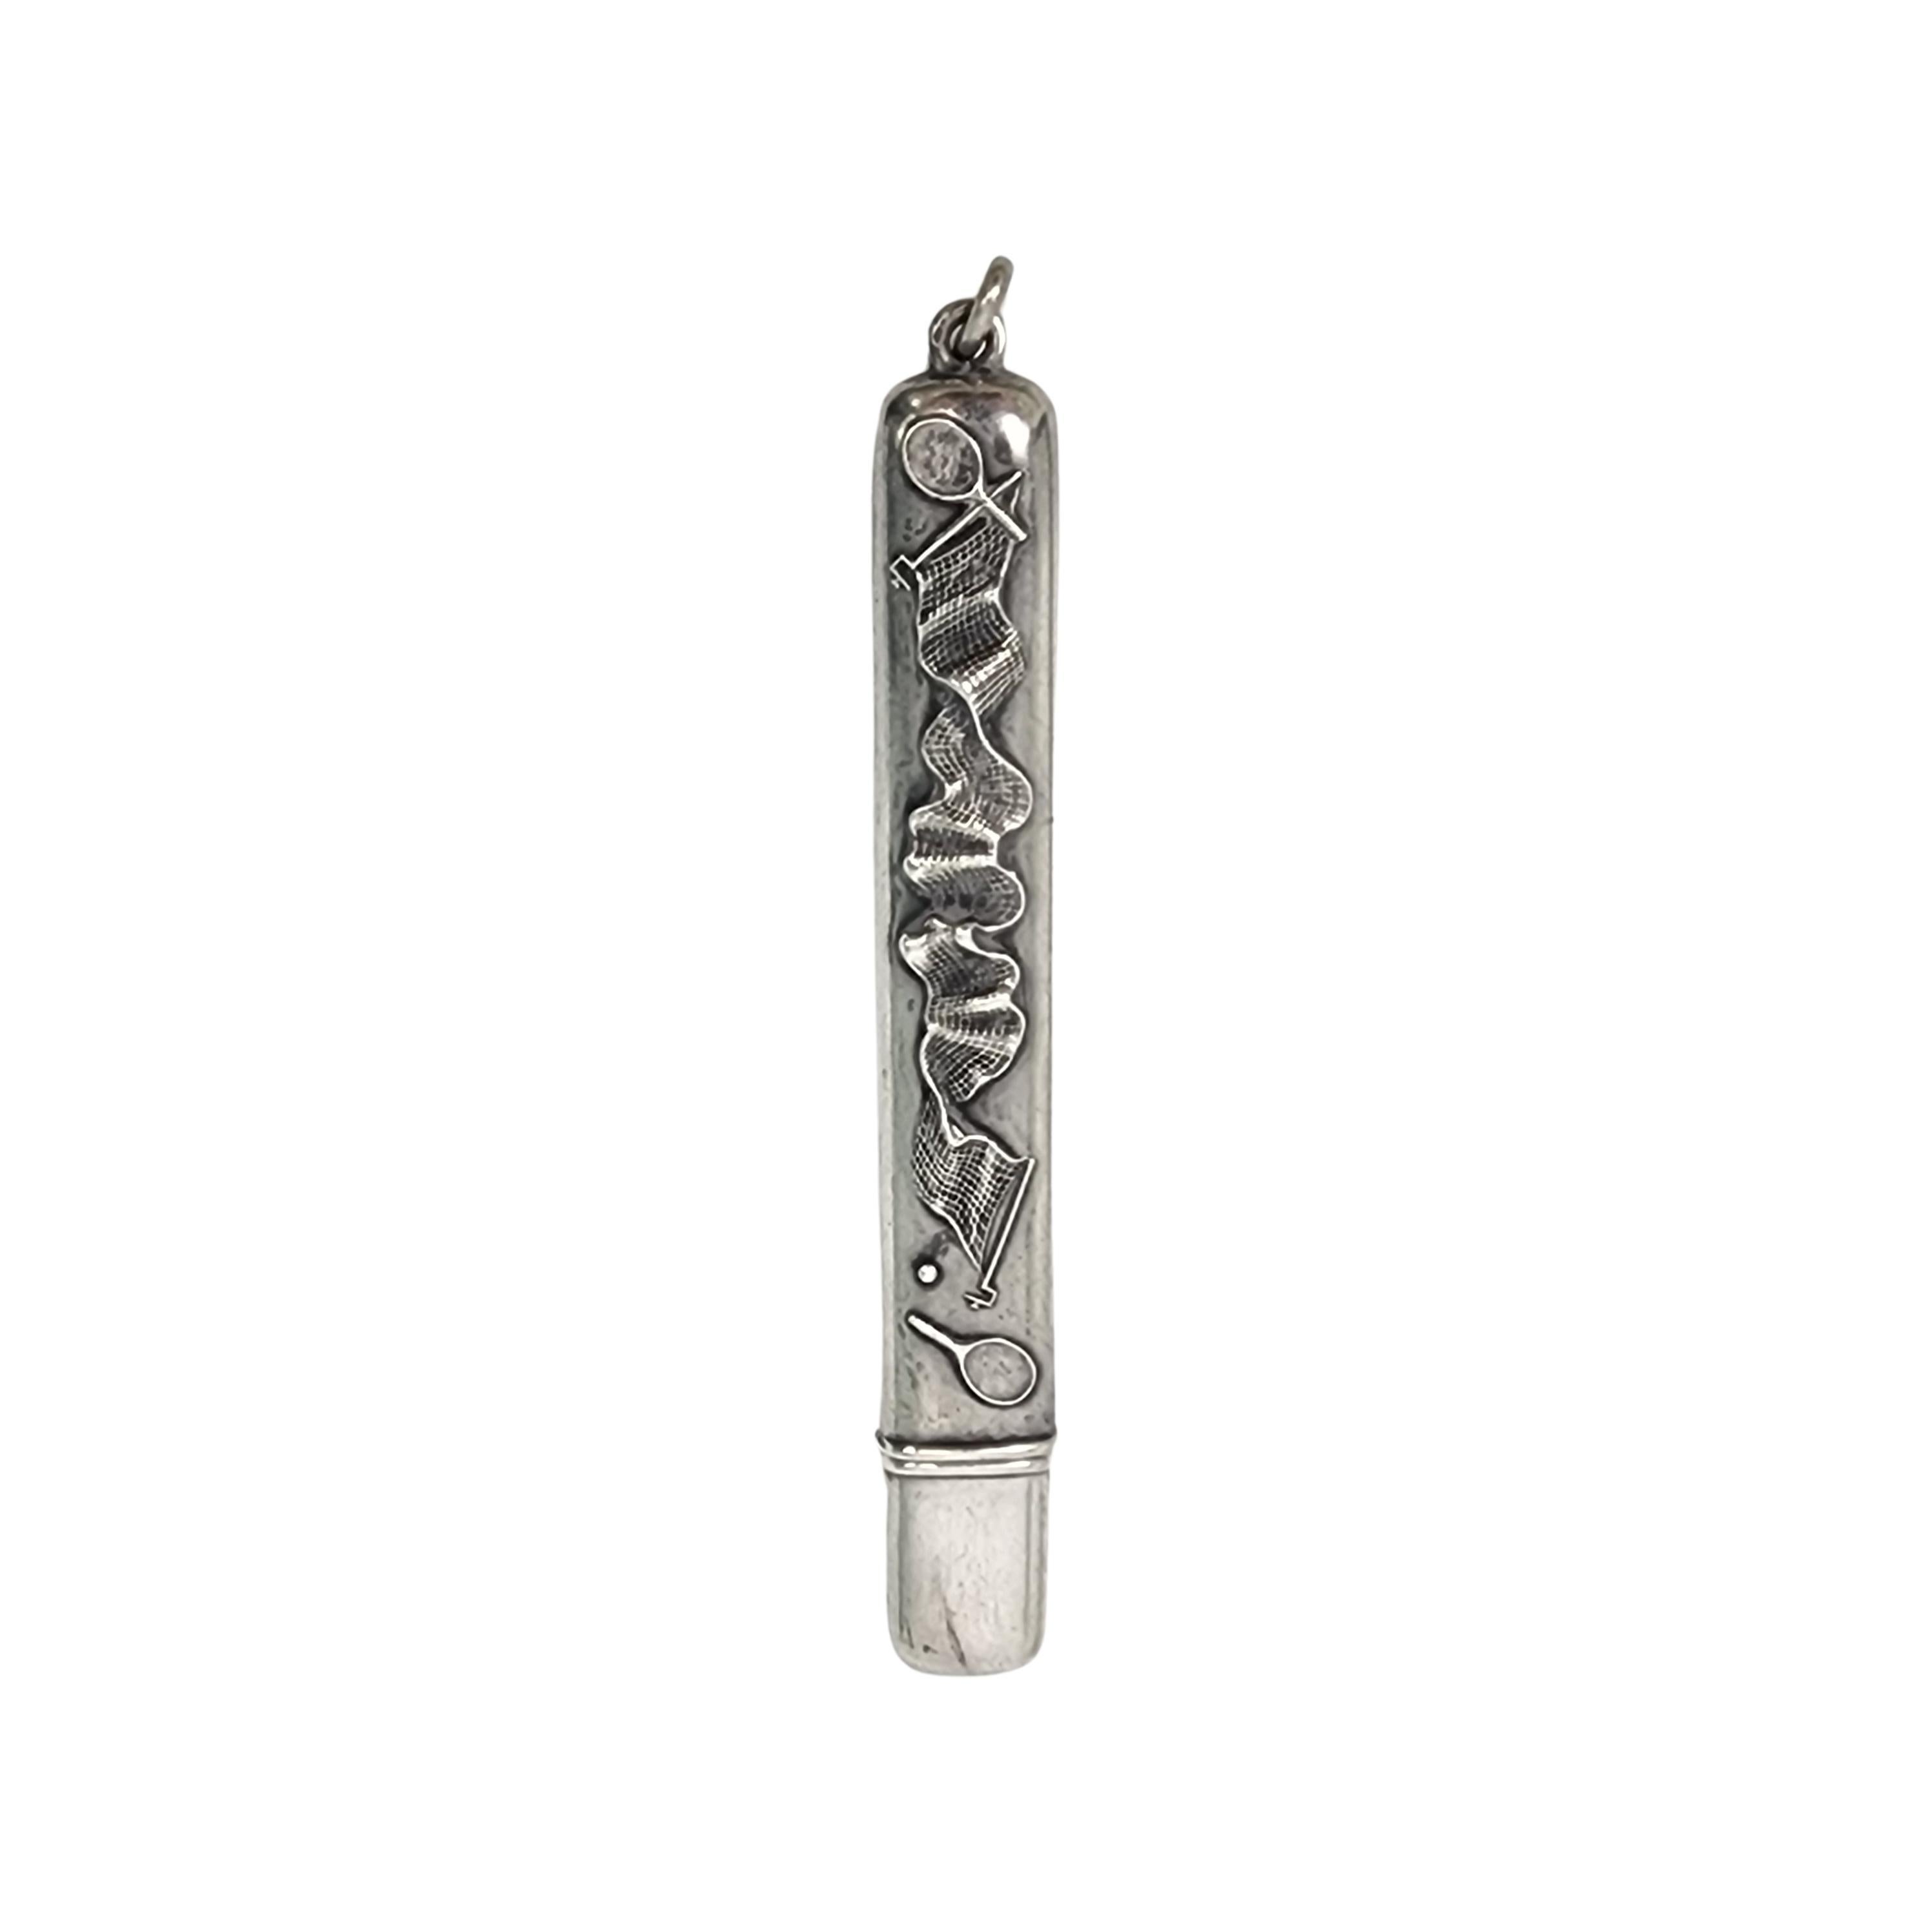 Antique sterling silver Chatelaine needle or pencil case.

This case features a tennis motif with a design including rackets, a net and a ball on each side. Can hold sewing needles or a pencil. Loop is attached for attaching to a chatelaine